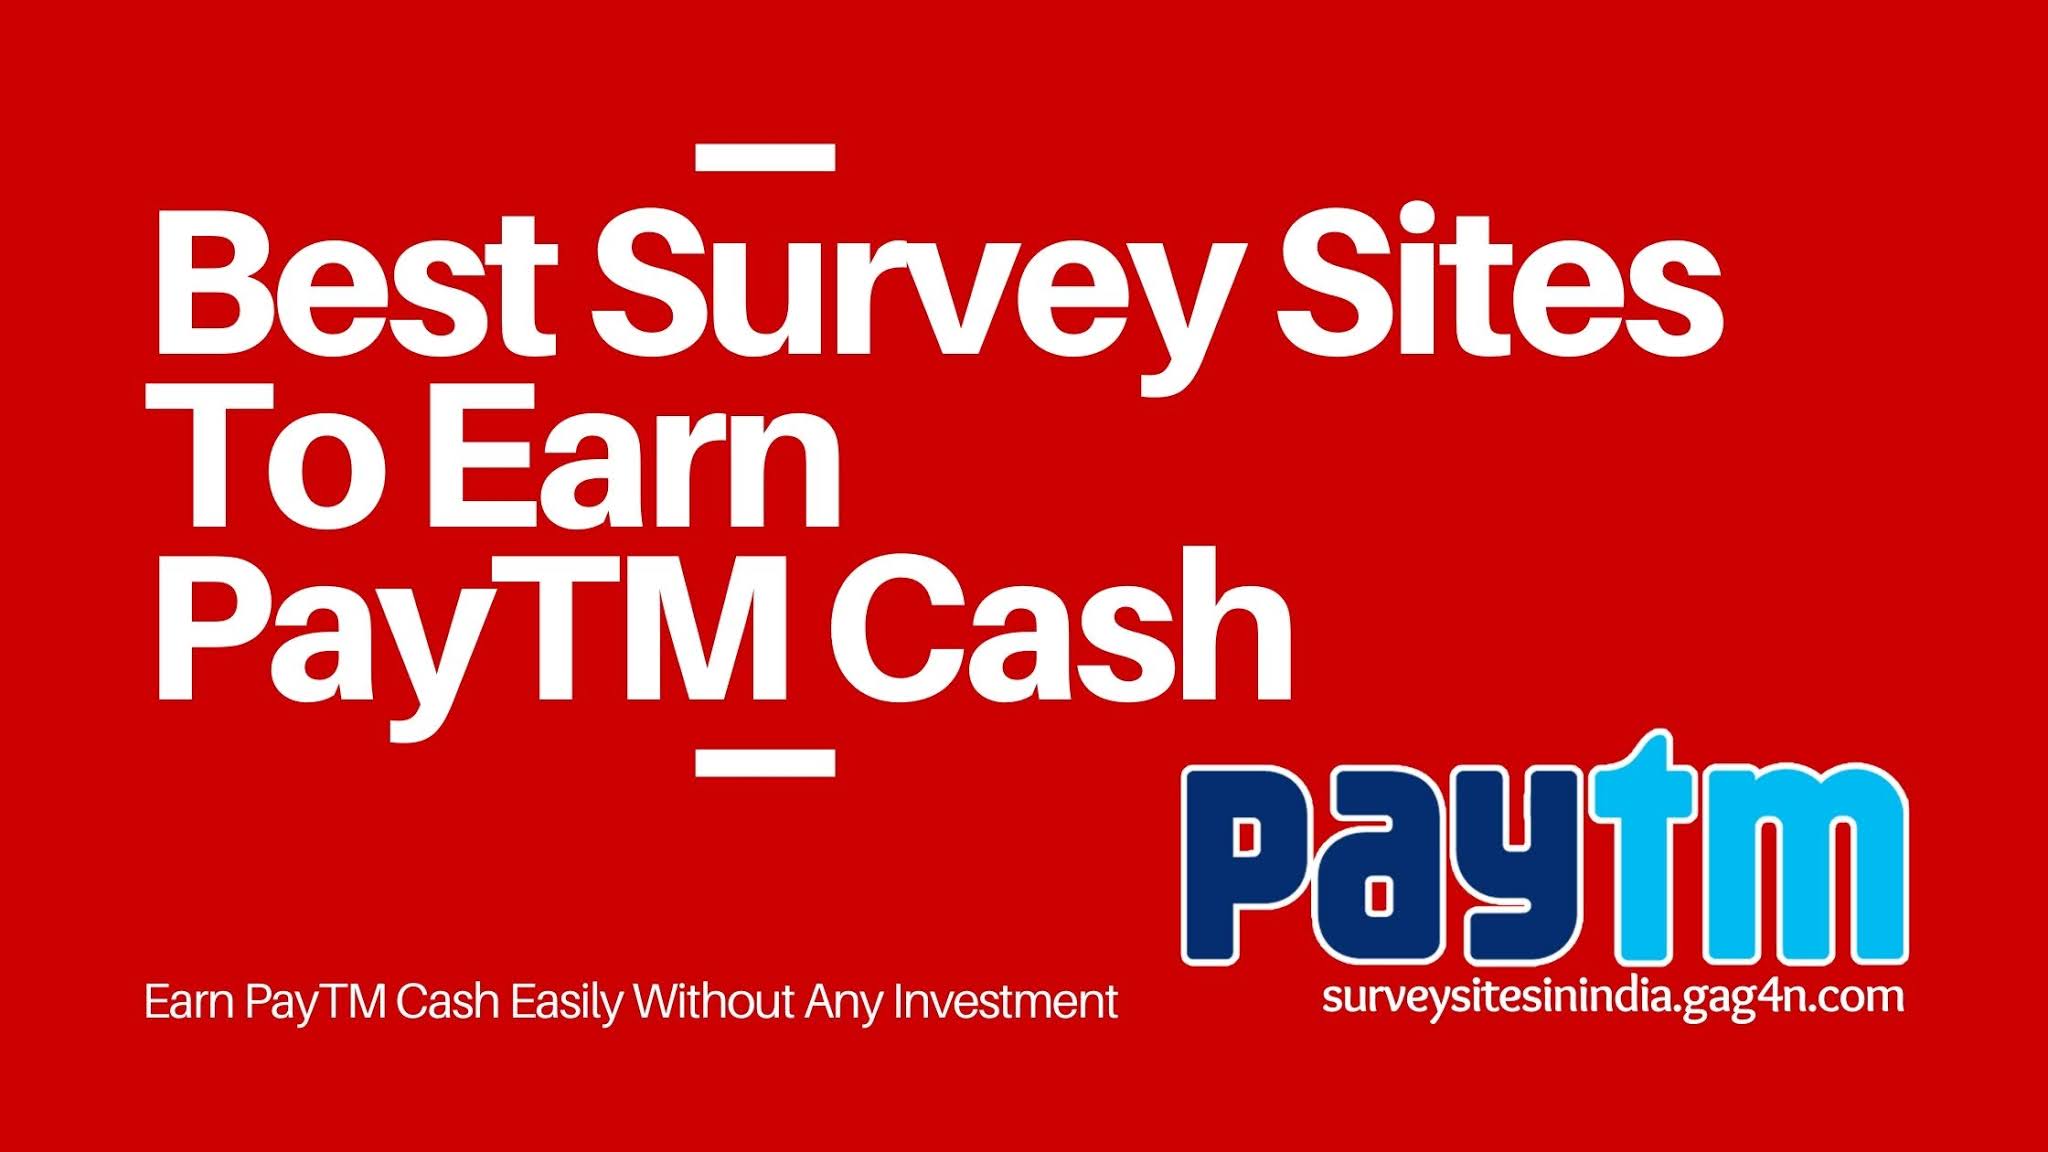 Top Survey Sites to Earn PayTM Cash Instantly Without